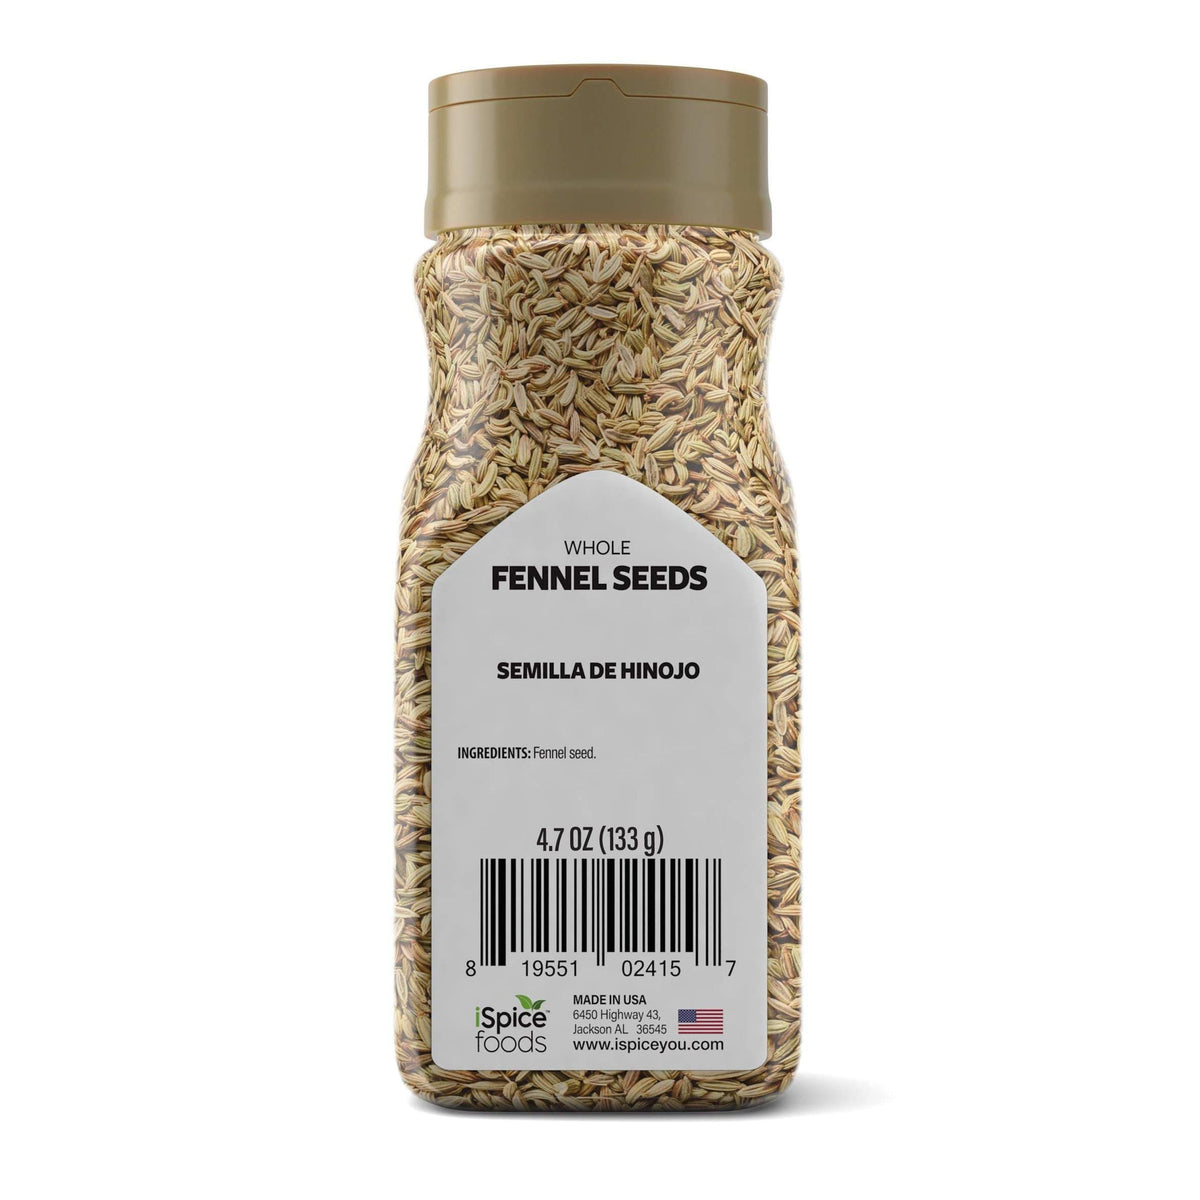 Discover the Health Benefits of Fennel Ground